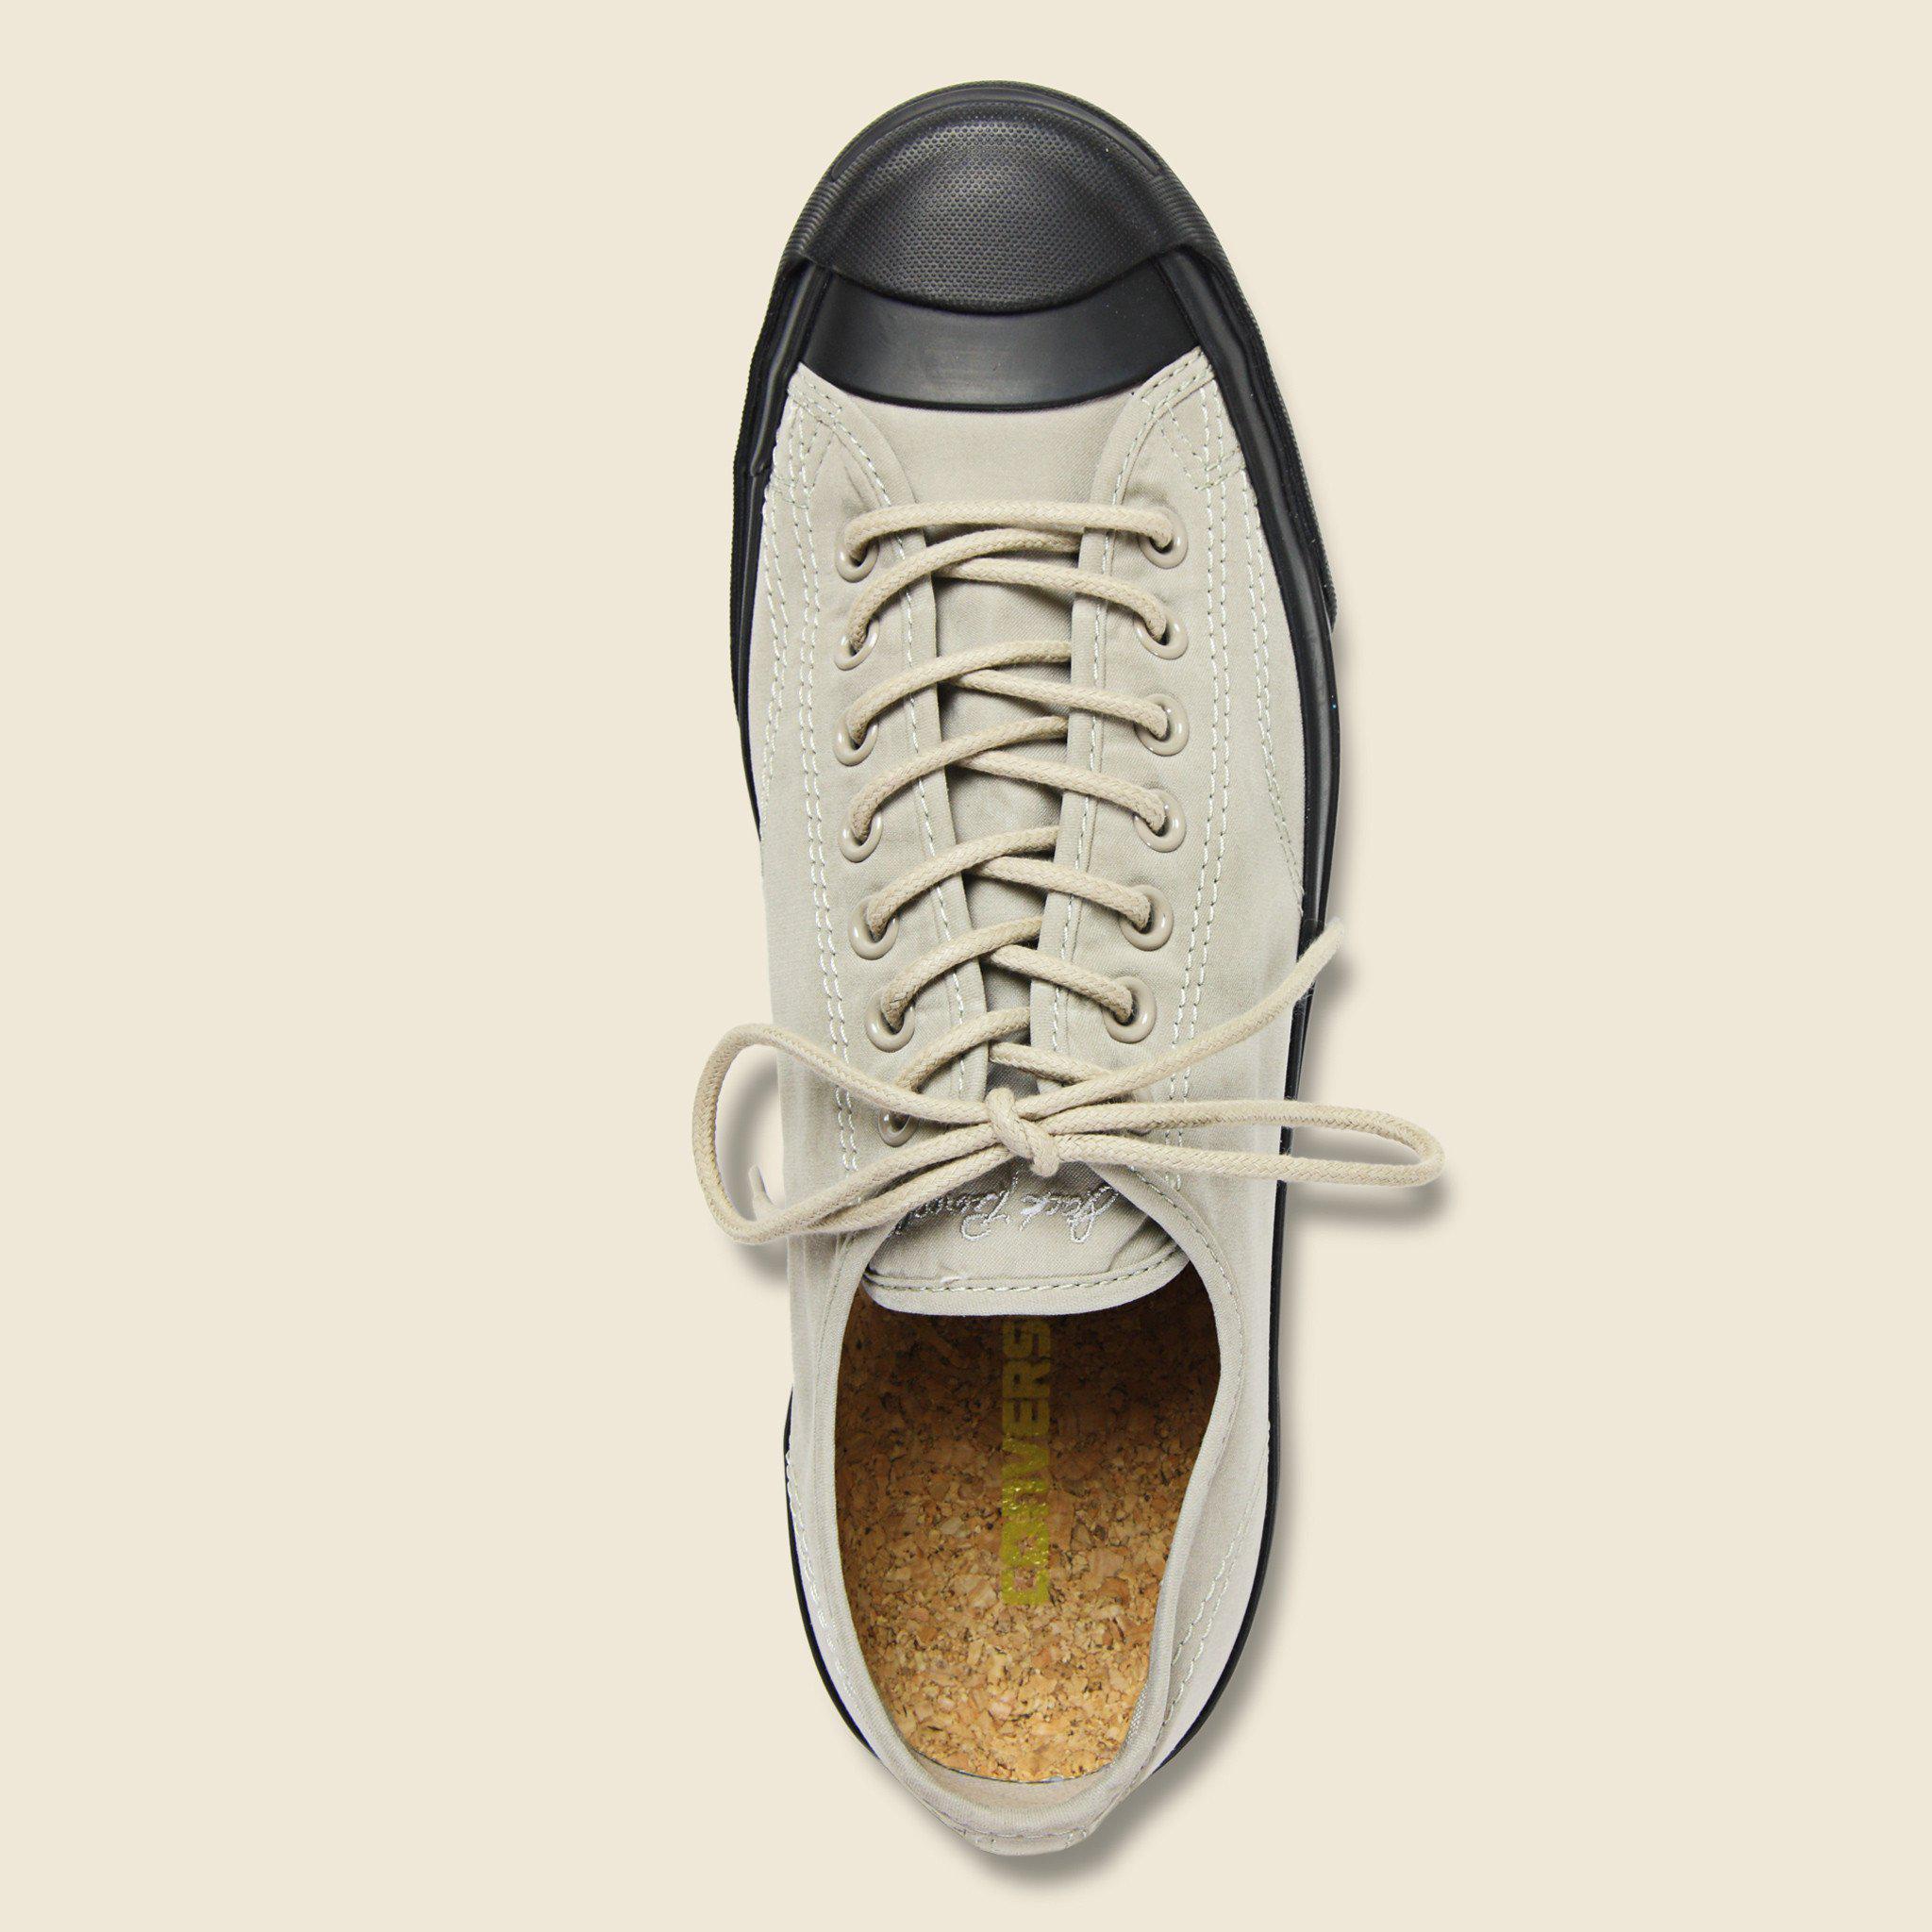 Converse Jack Purcell Jack - Papyrus/black for Men - Lyst